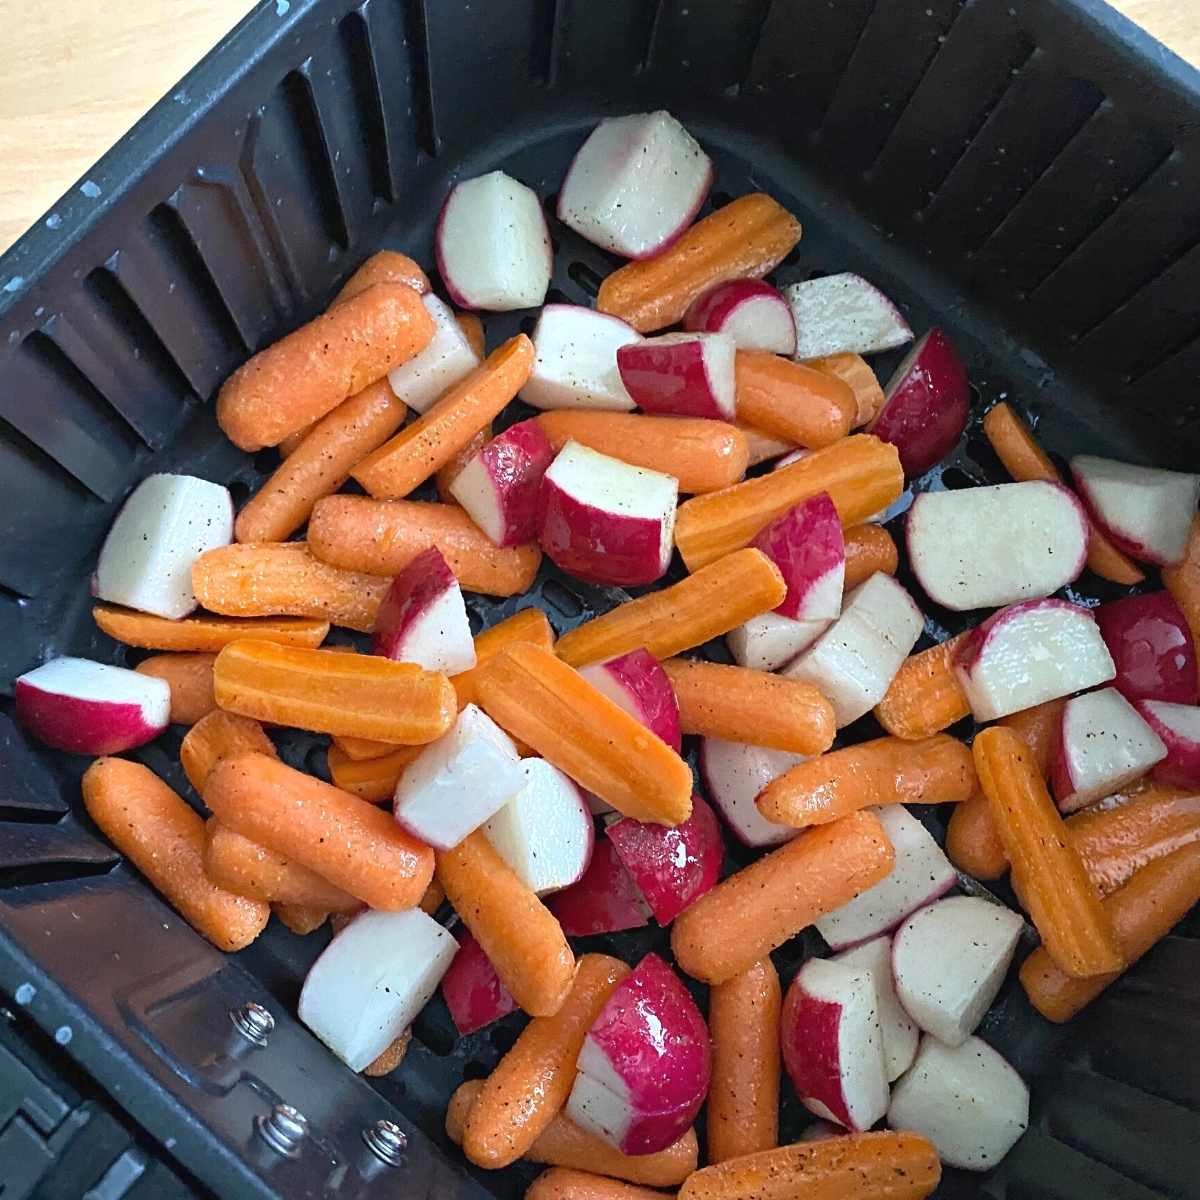 Carrots and radishes in an air fryer basket.